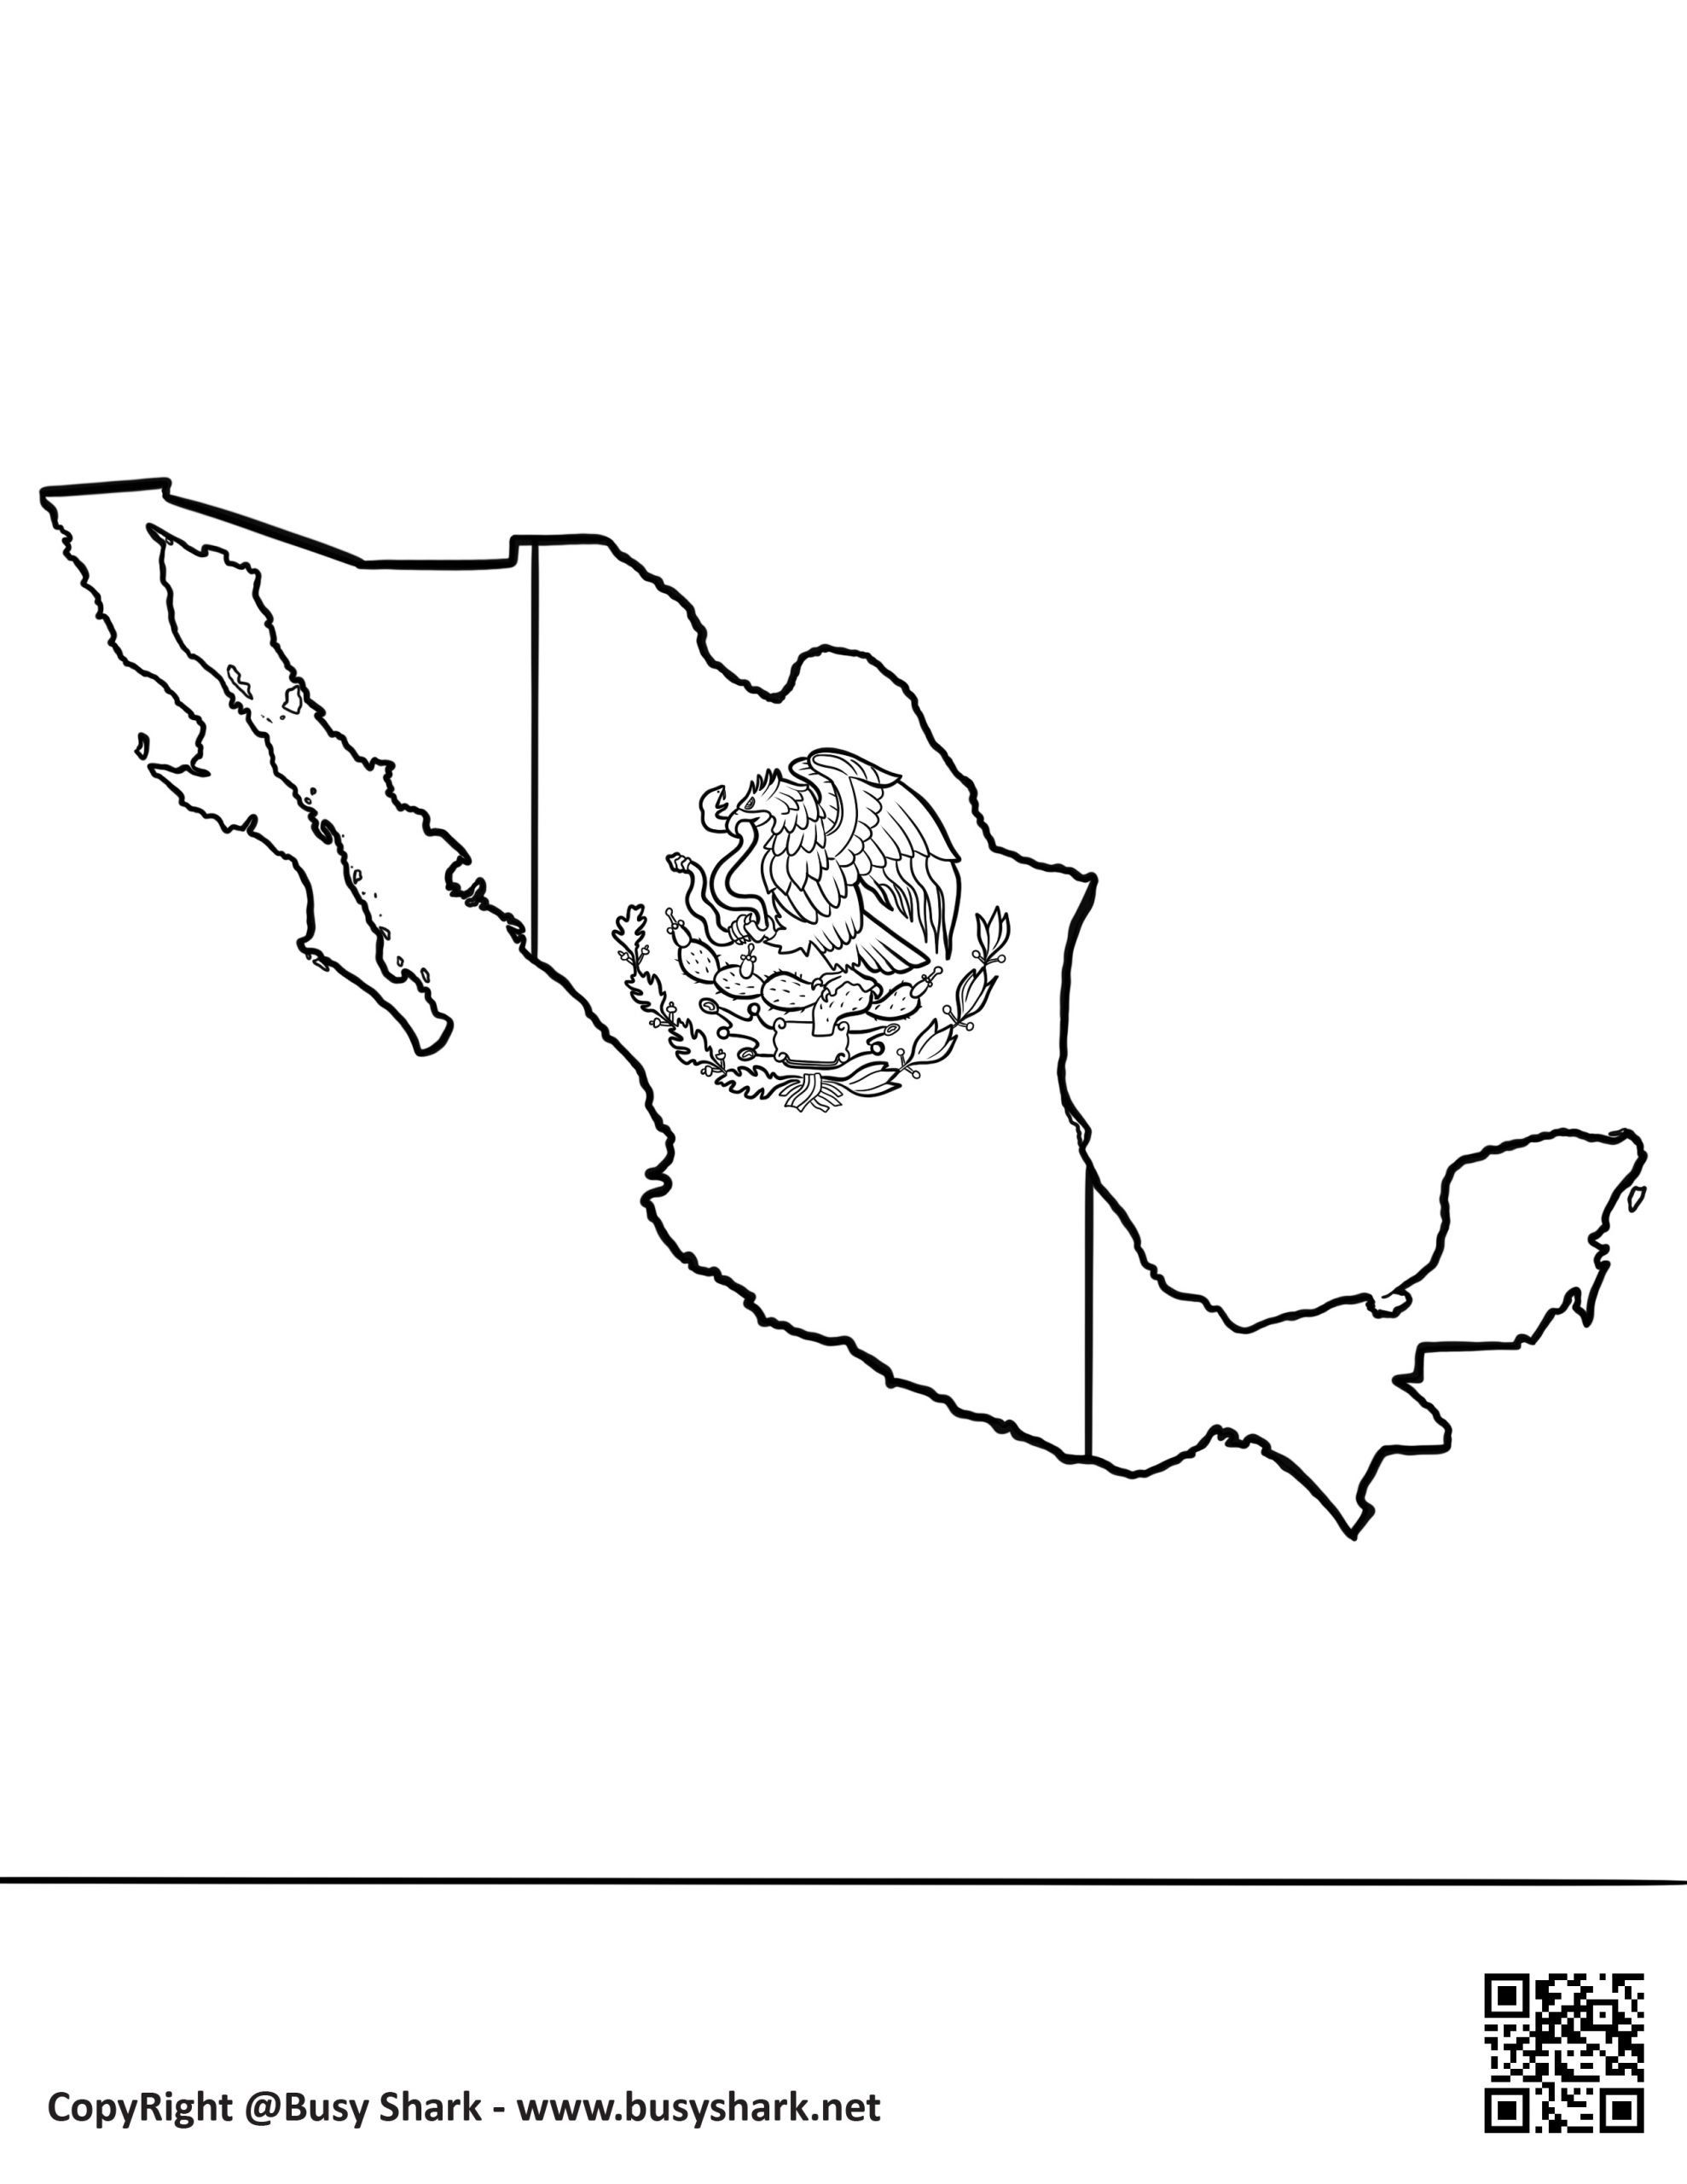 Mexico flag map coloring page